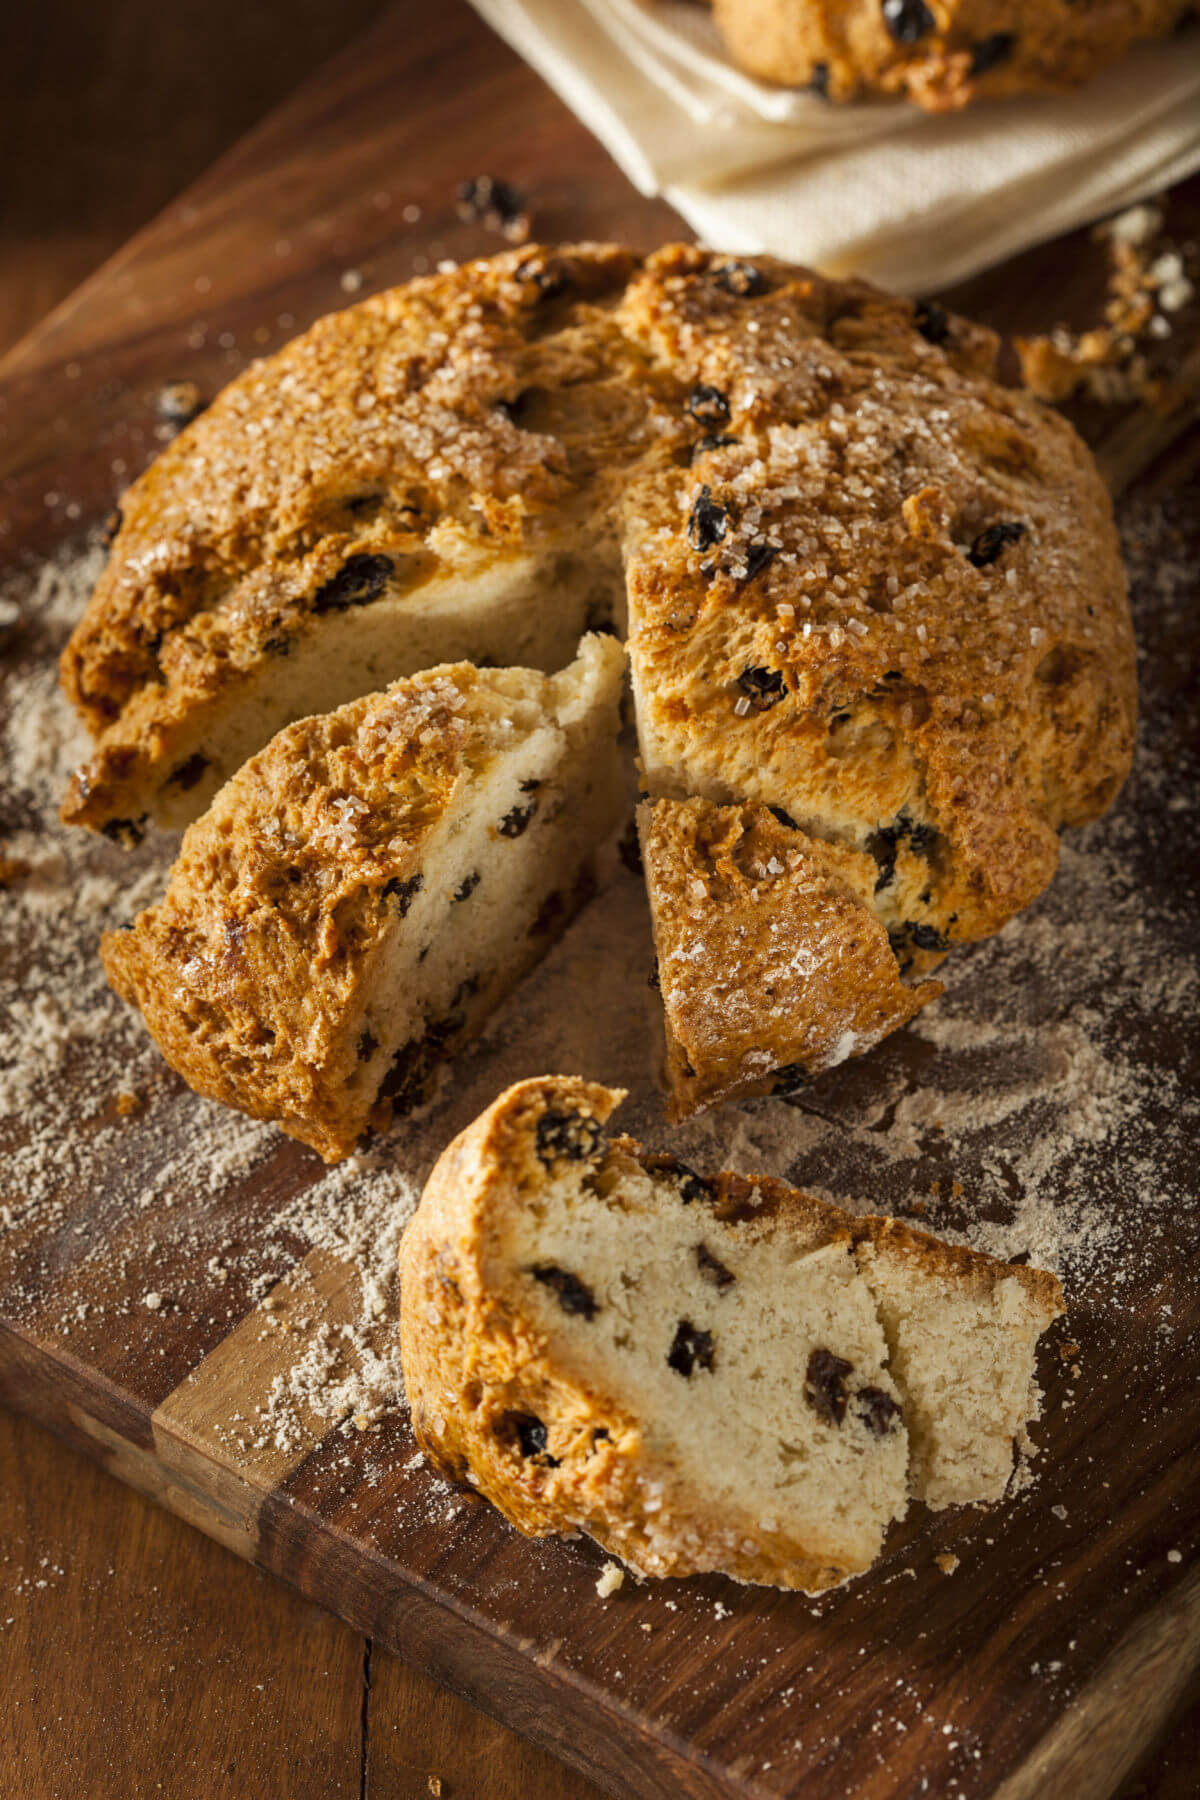 A homemade round loaf of Irish soda bread on a wooden cutting board. The bread is cut into wedges and made with raisins. 